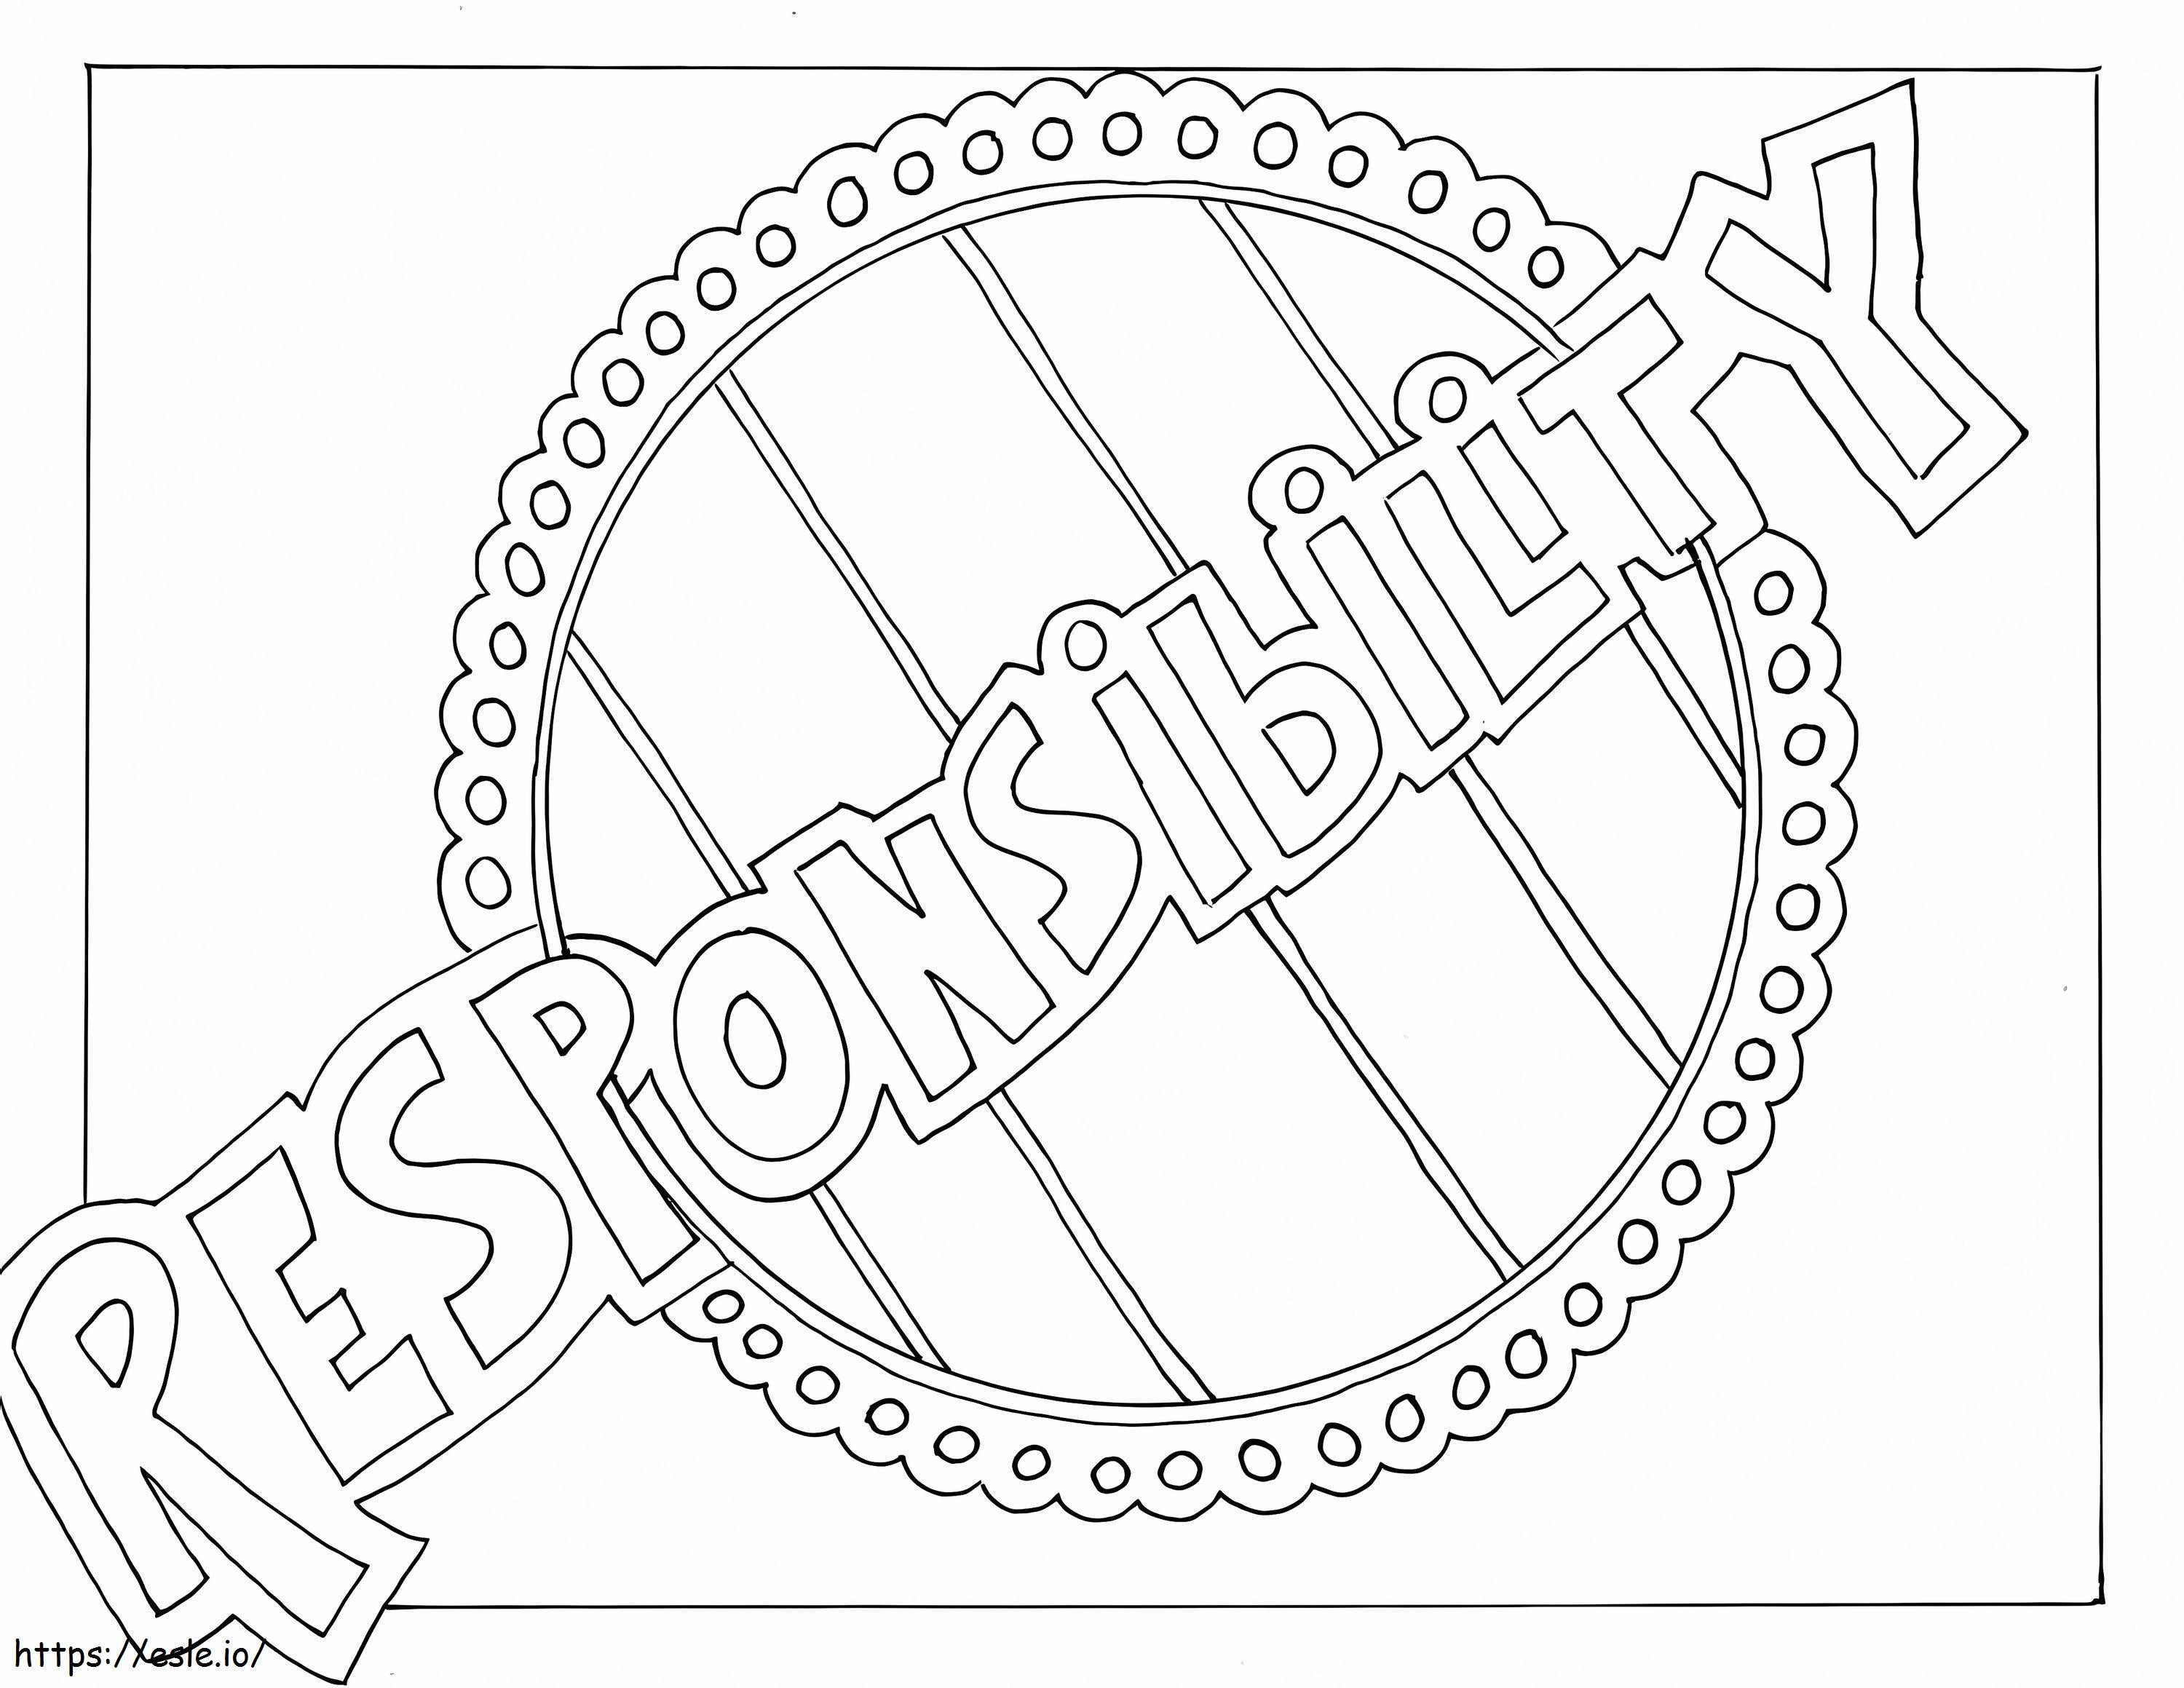 Responsibility Doodle Art coloring page